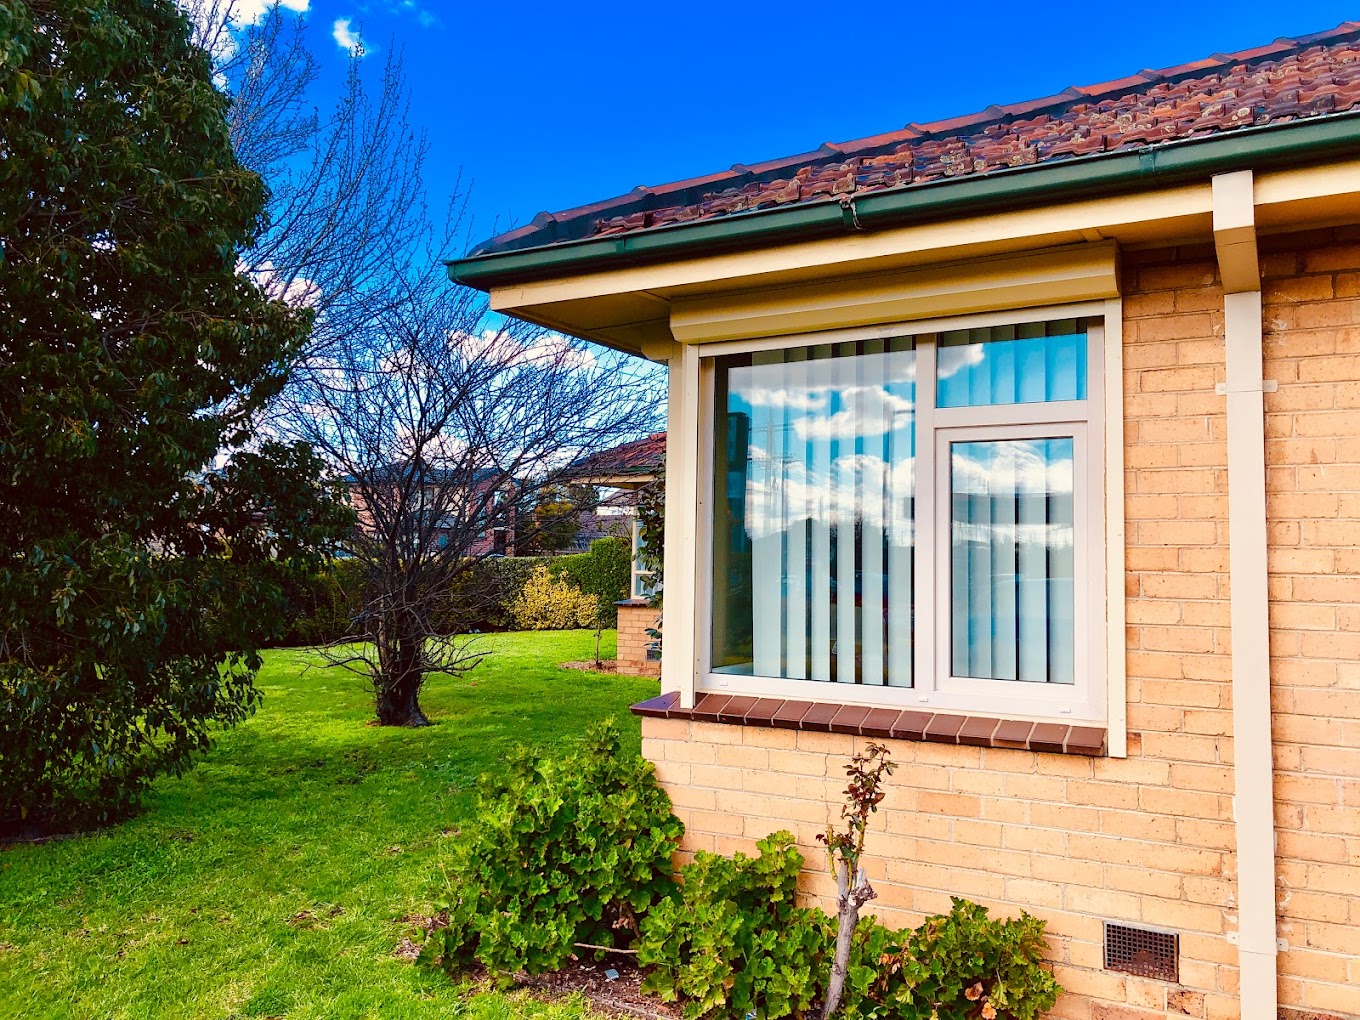 Stay Cool This Summer With Double Glazed Windows - Aaa Glass in West Perth WA thumbnail